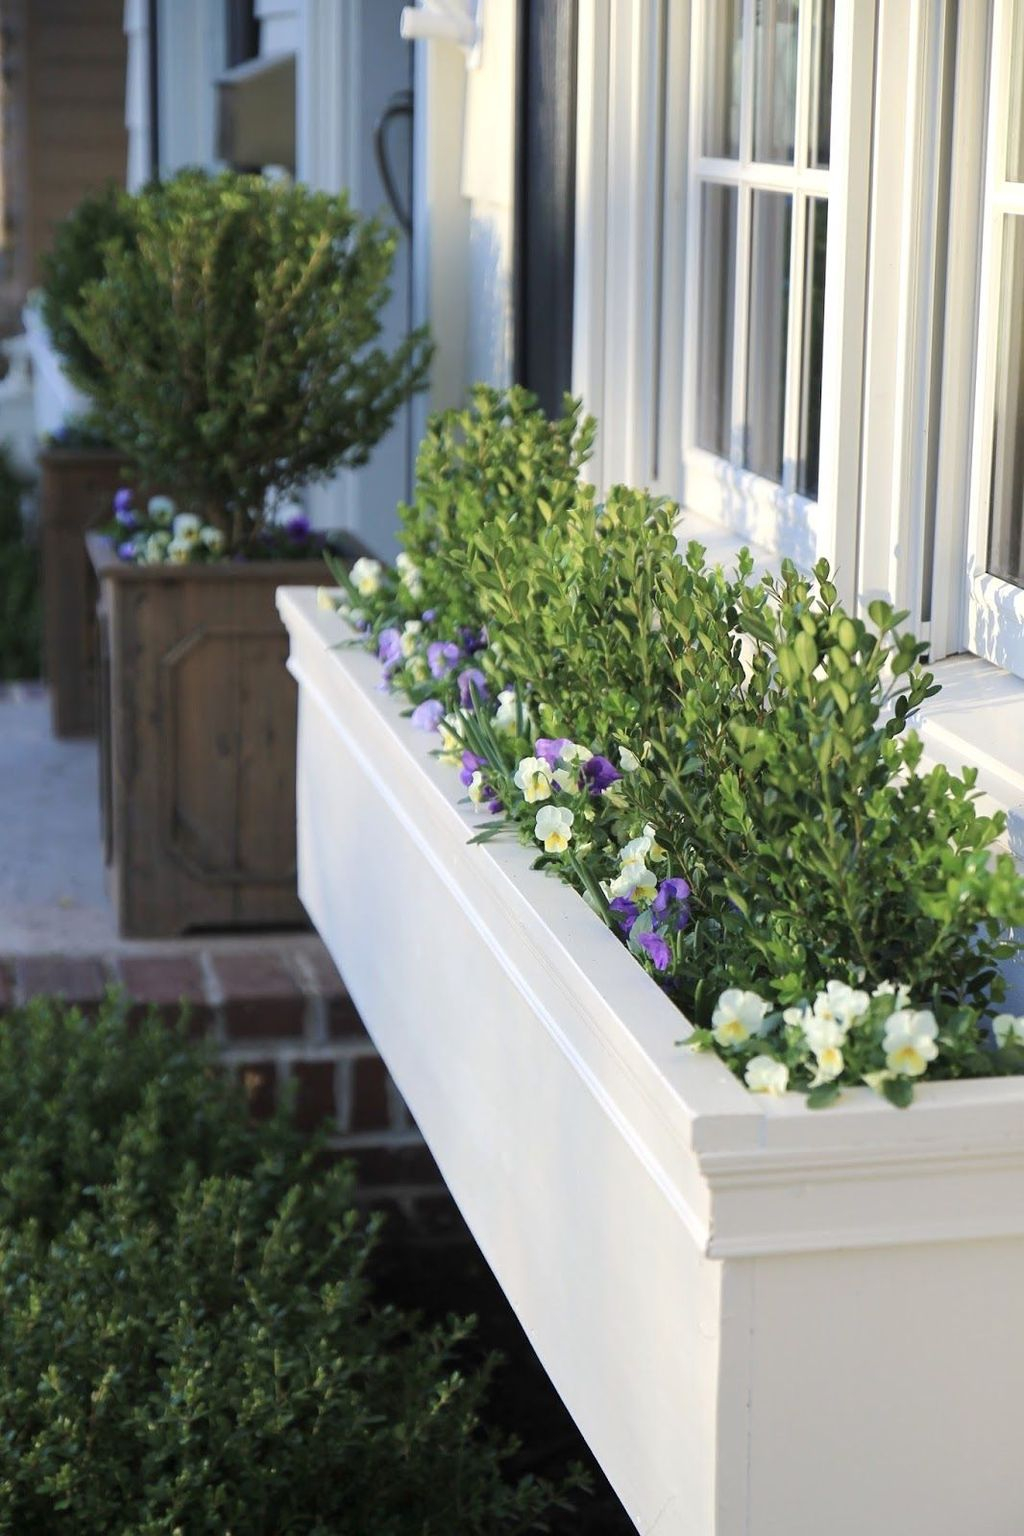 Amazing Windows Flower Boxes Design Ideas Must See03